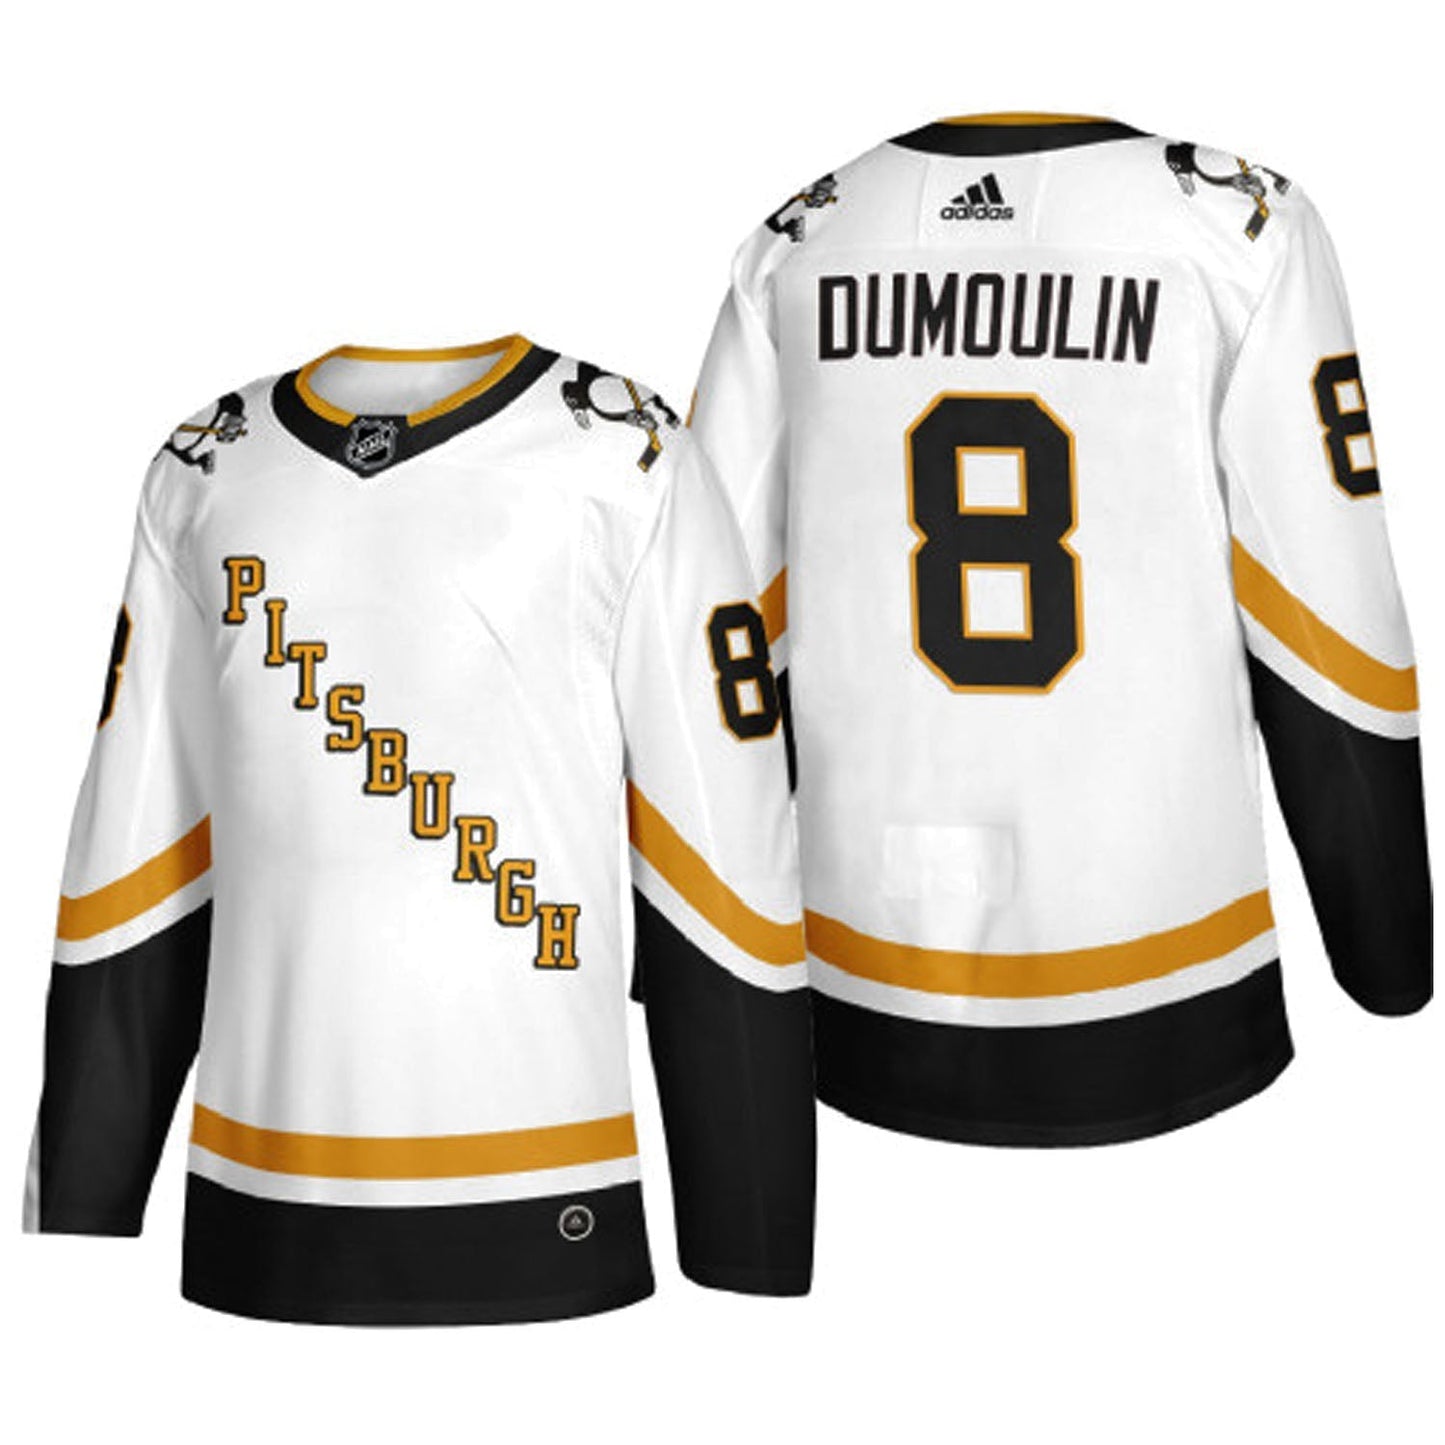 NHL Brian Dumoulin Pittsburgh Penguins 8 Jersey